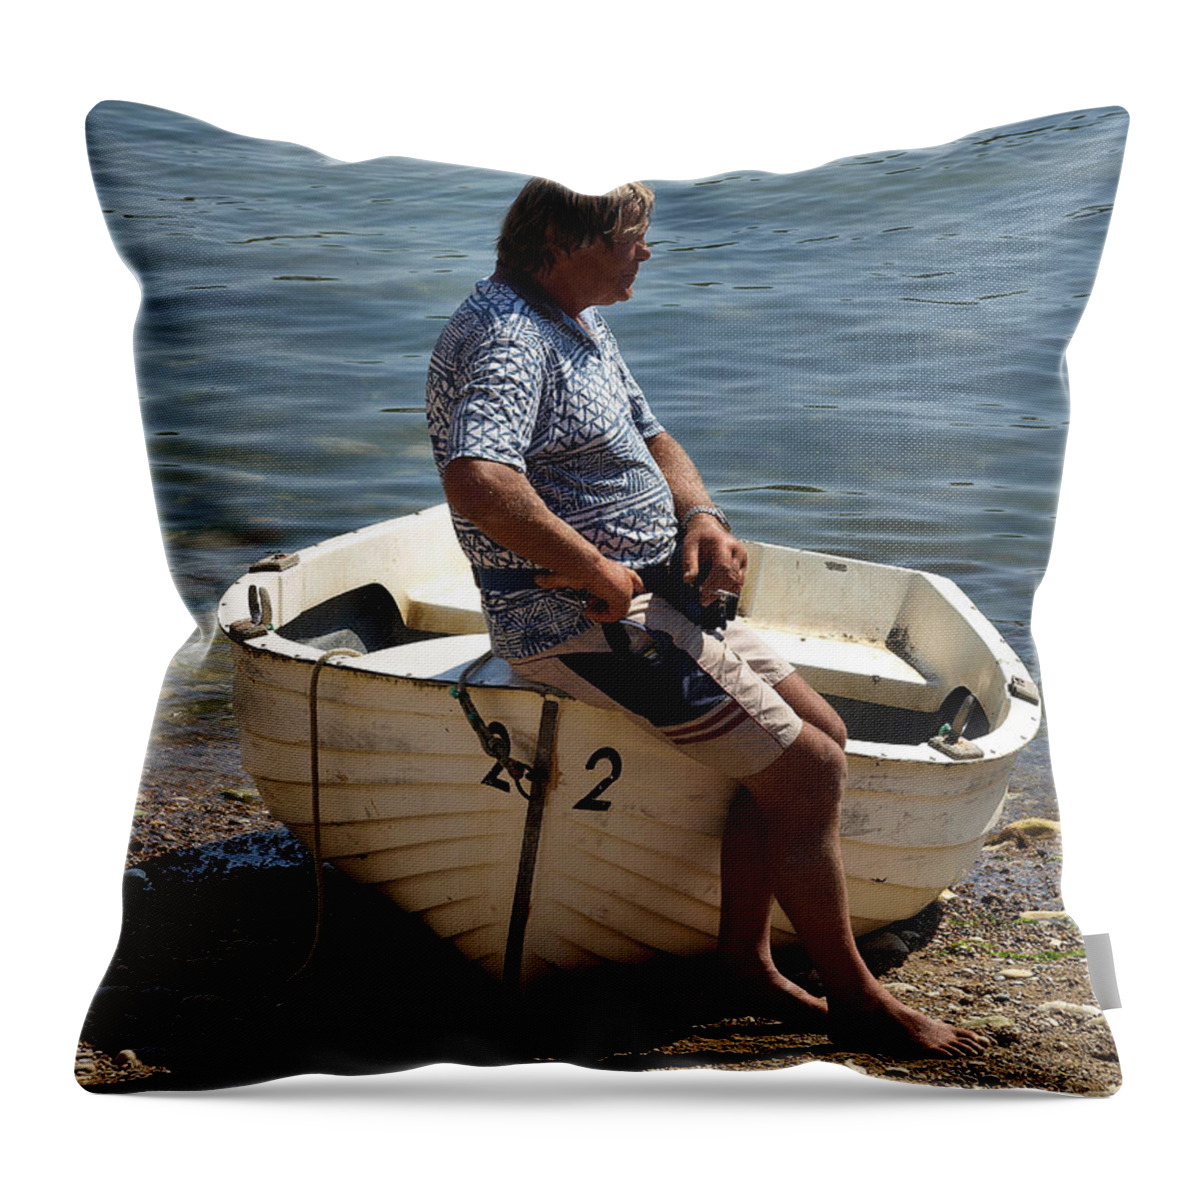 Candid Throw Pillow featuring the photograph Contemplation by Richard Denyer